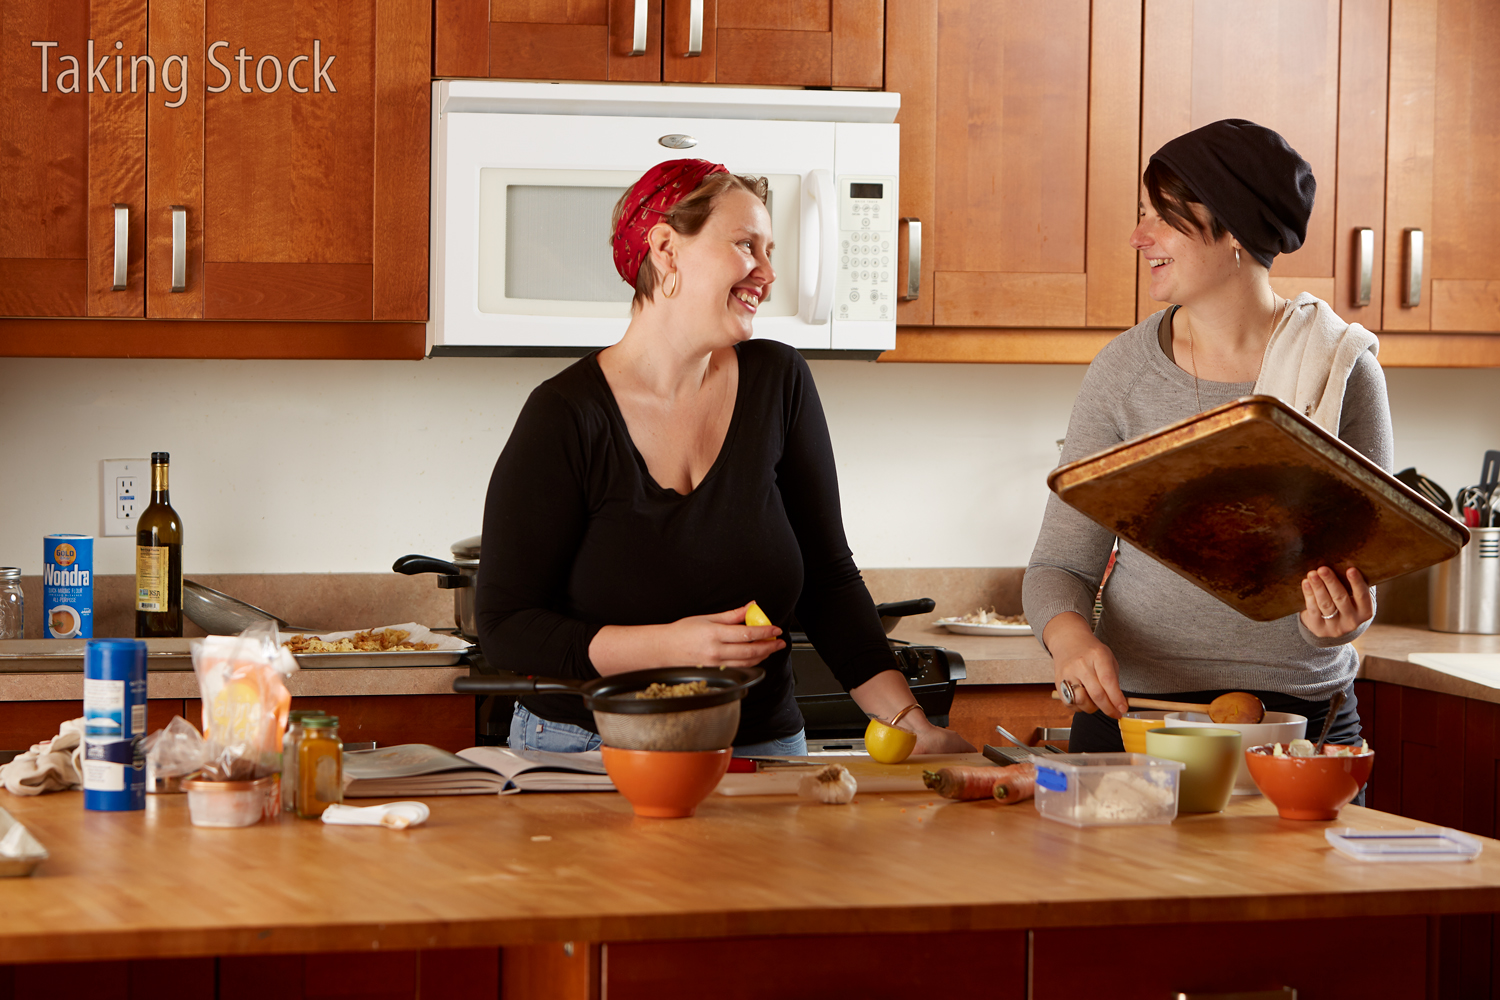 Taking Stock Founders Molly and Maddy in the kitchen